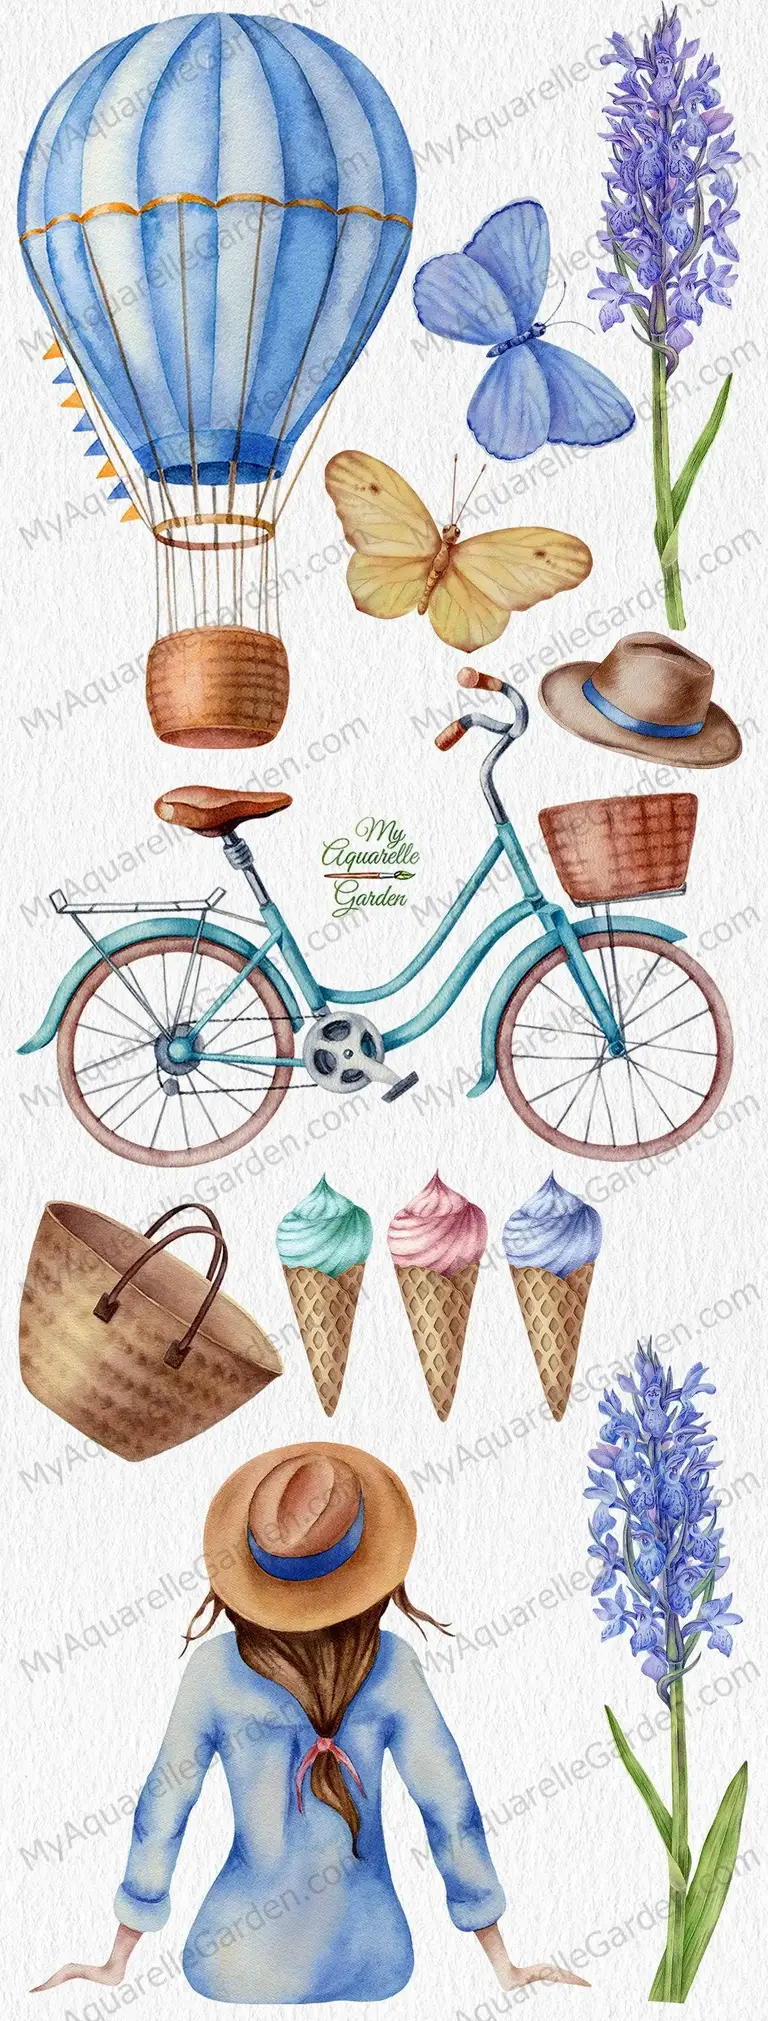 Summertime. Ice cream, flowers, butterflies, hot air balloon, bicycle, young lady in wide brimmed hat. Watercolor hand-painted illustrations.